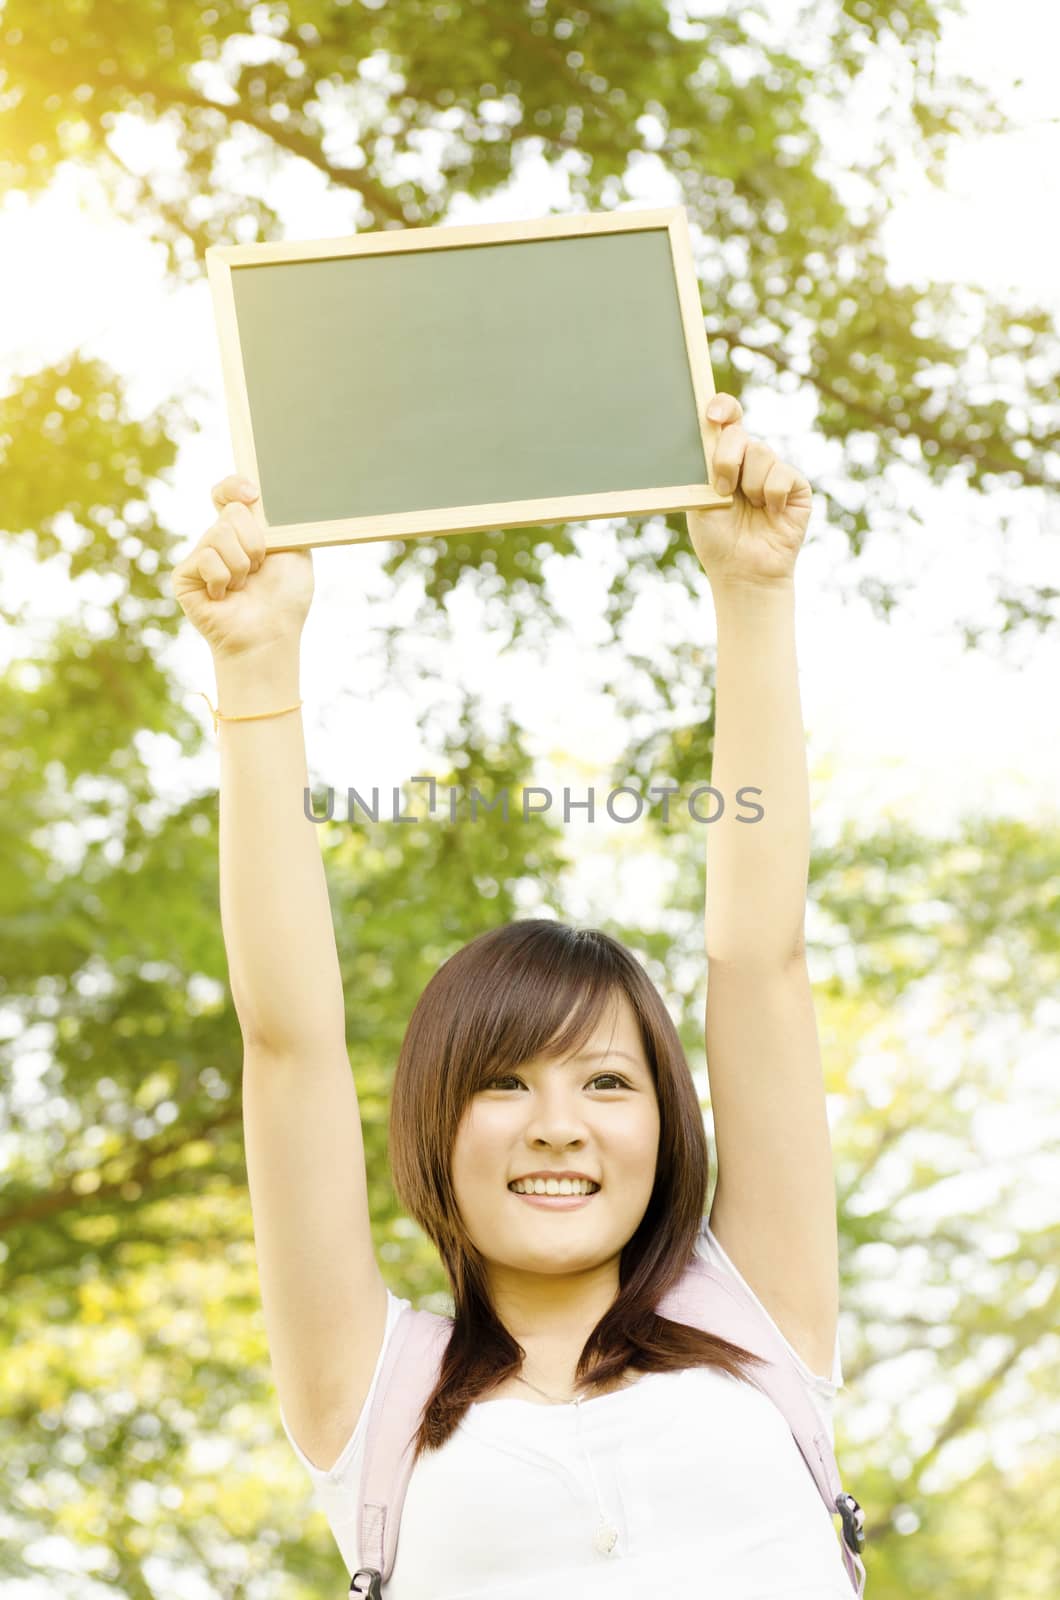 Young Asian college girl student standing on campus lawn, hands raised a blank chalkboard and smiling.